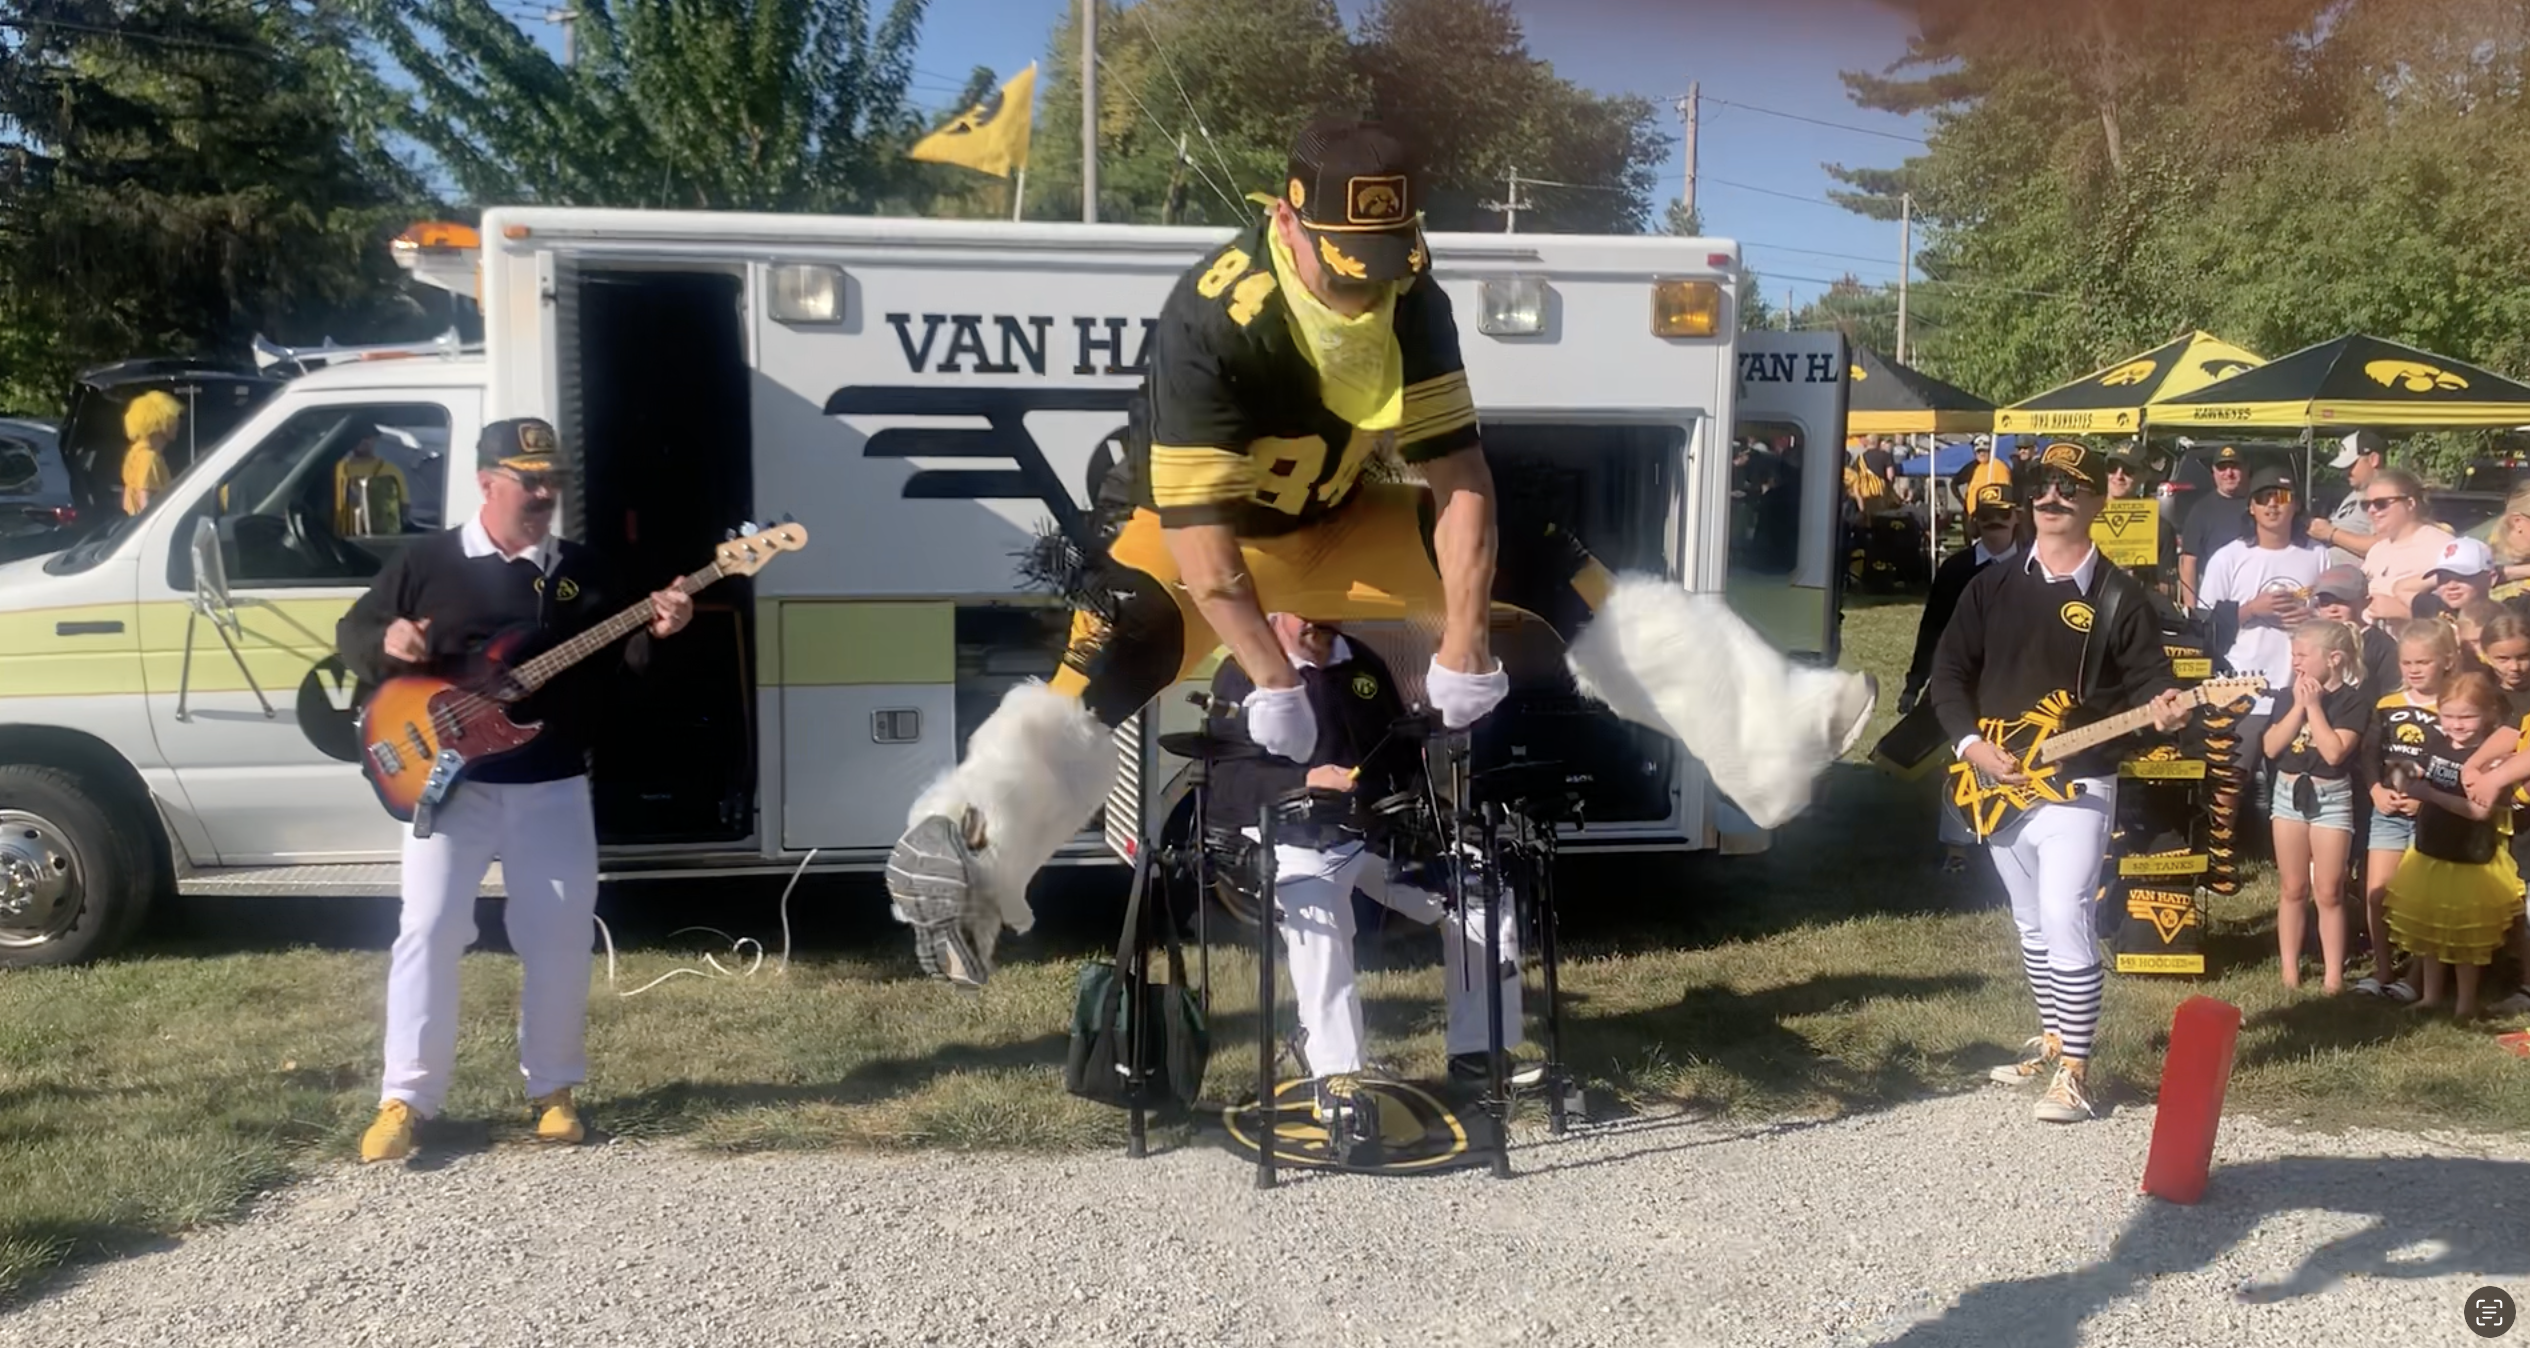 Van Hayden Band Performing at a tailgate in front of their Vanbulance at a tailgate for the Iowa vs. Utah State game